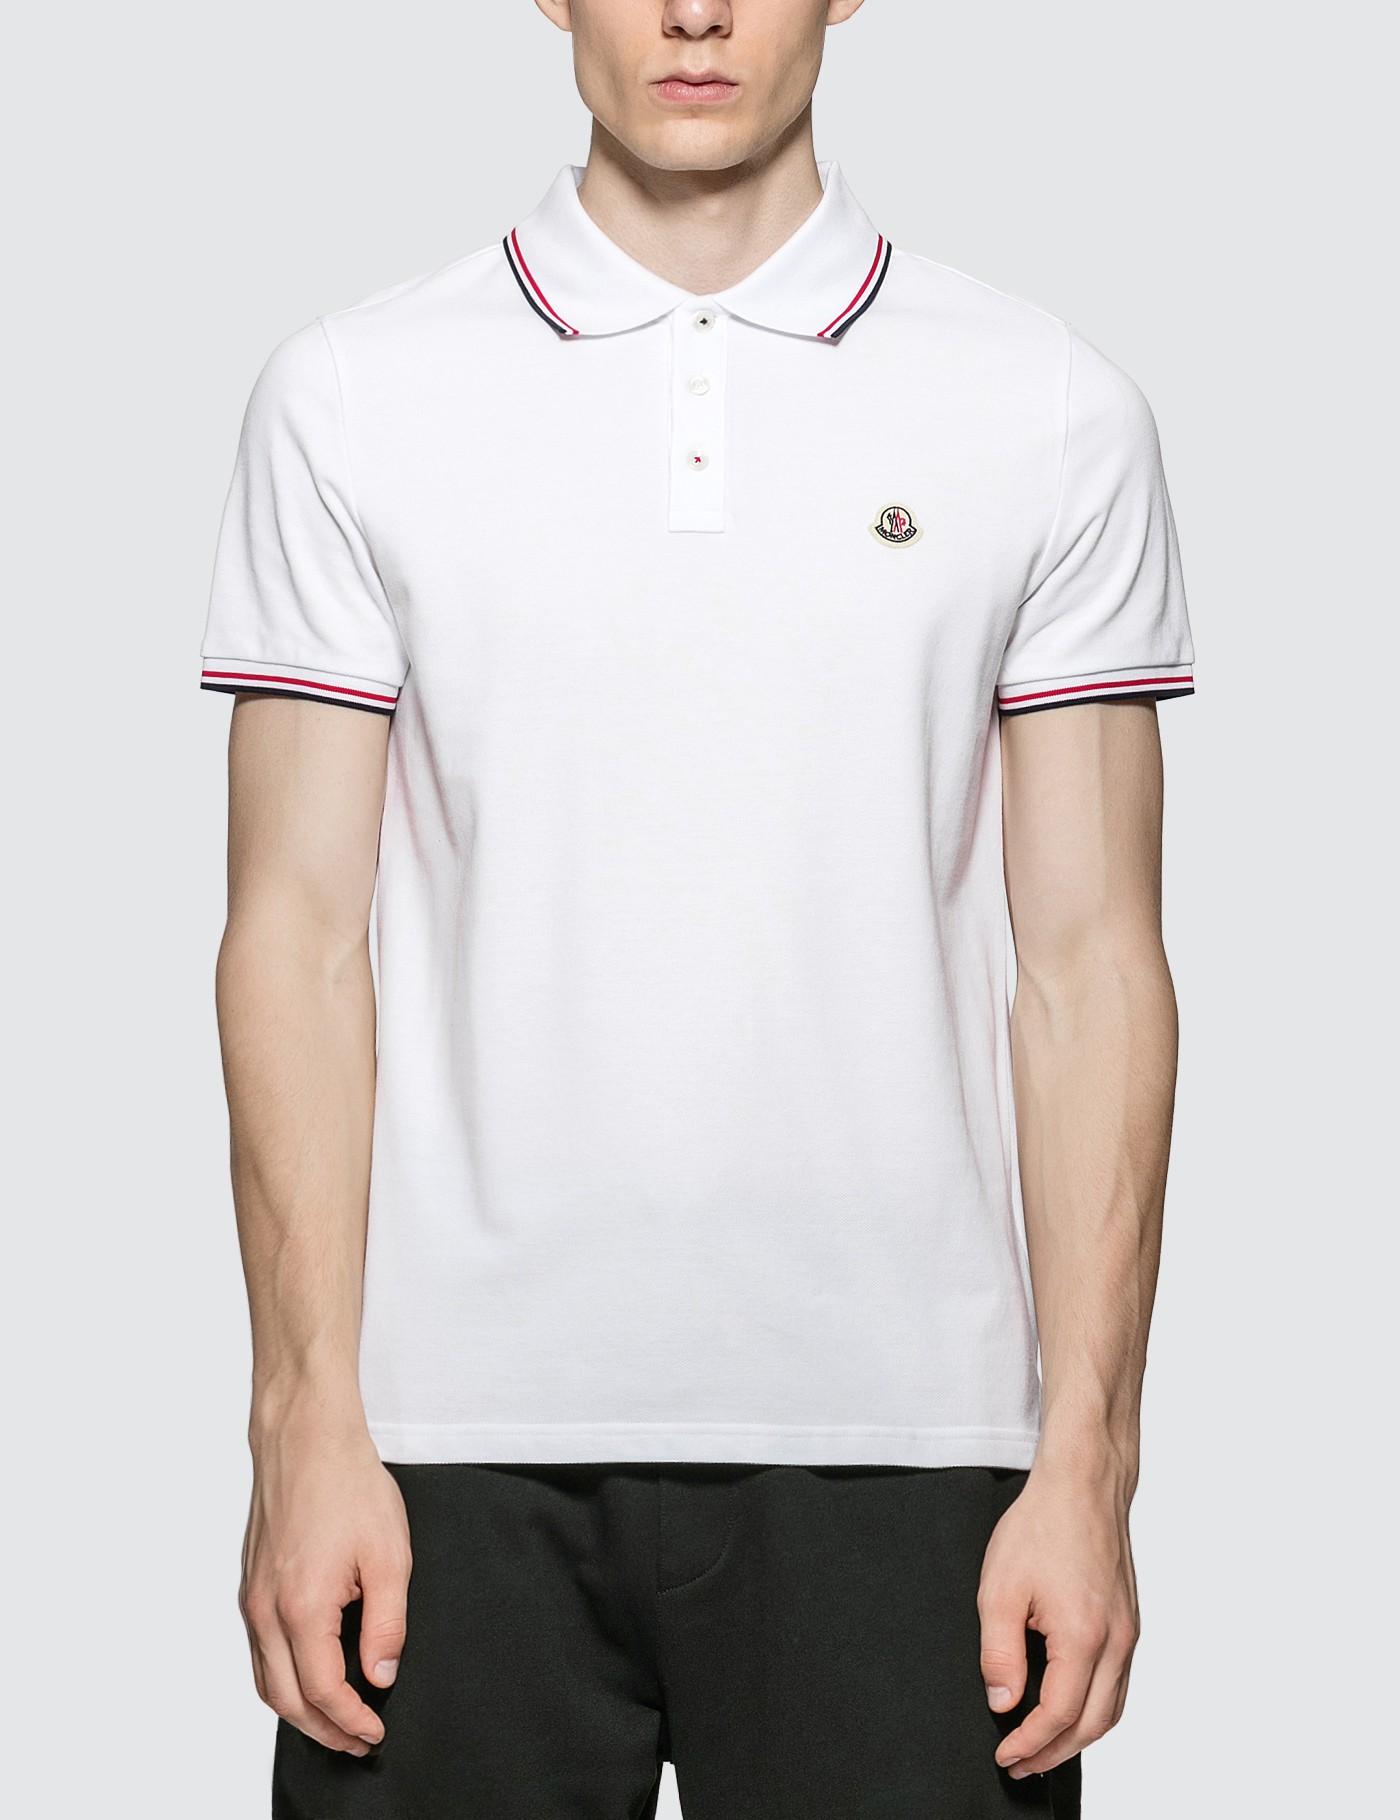 Moncler Cotton Logo Patch Polo in White for Men - Lyst